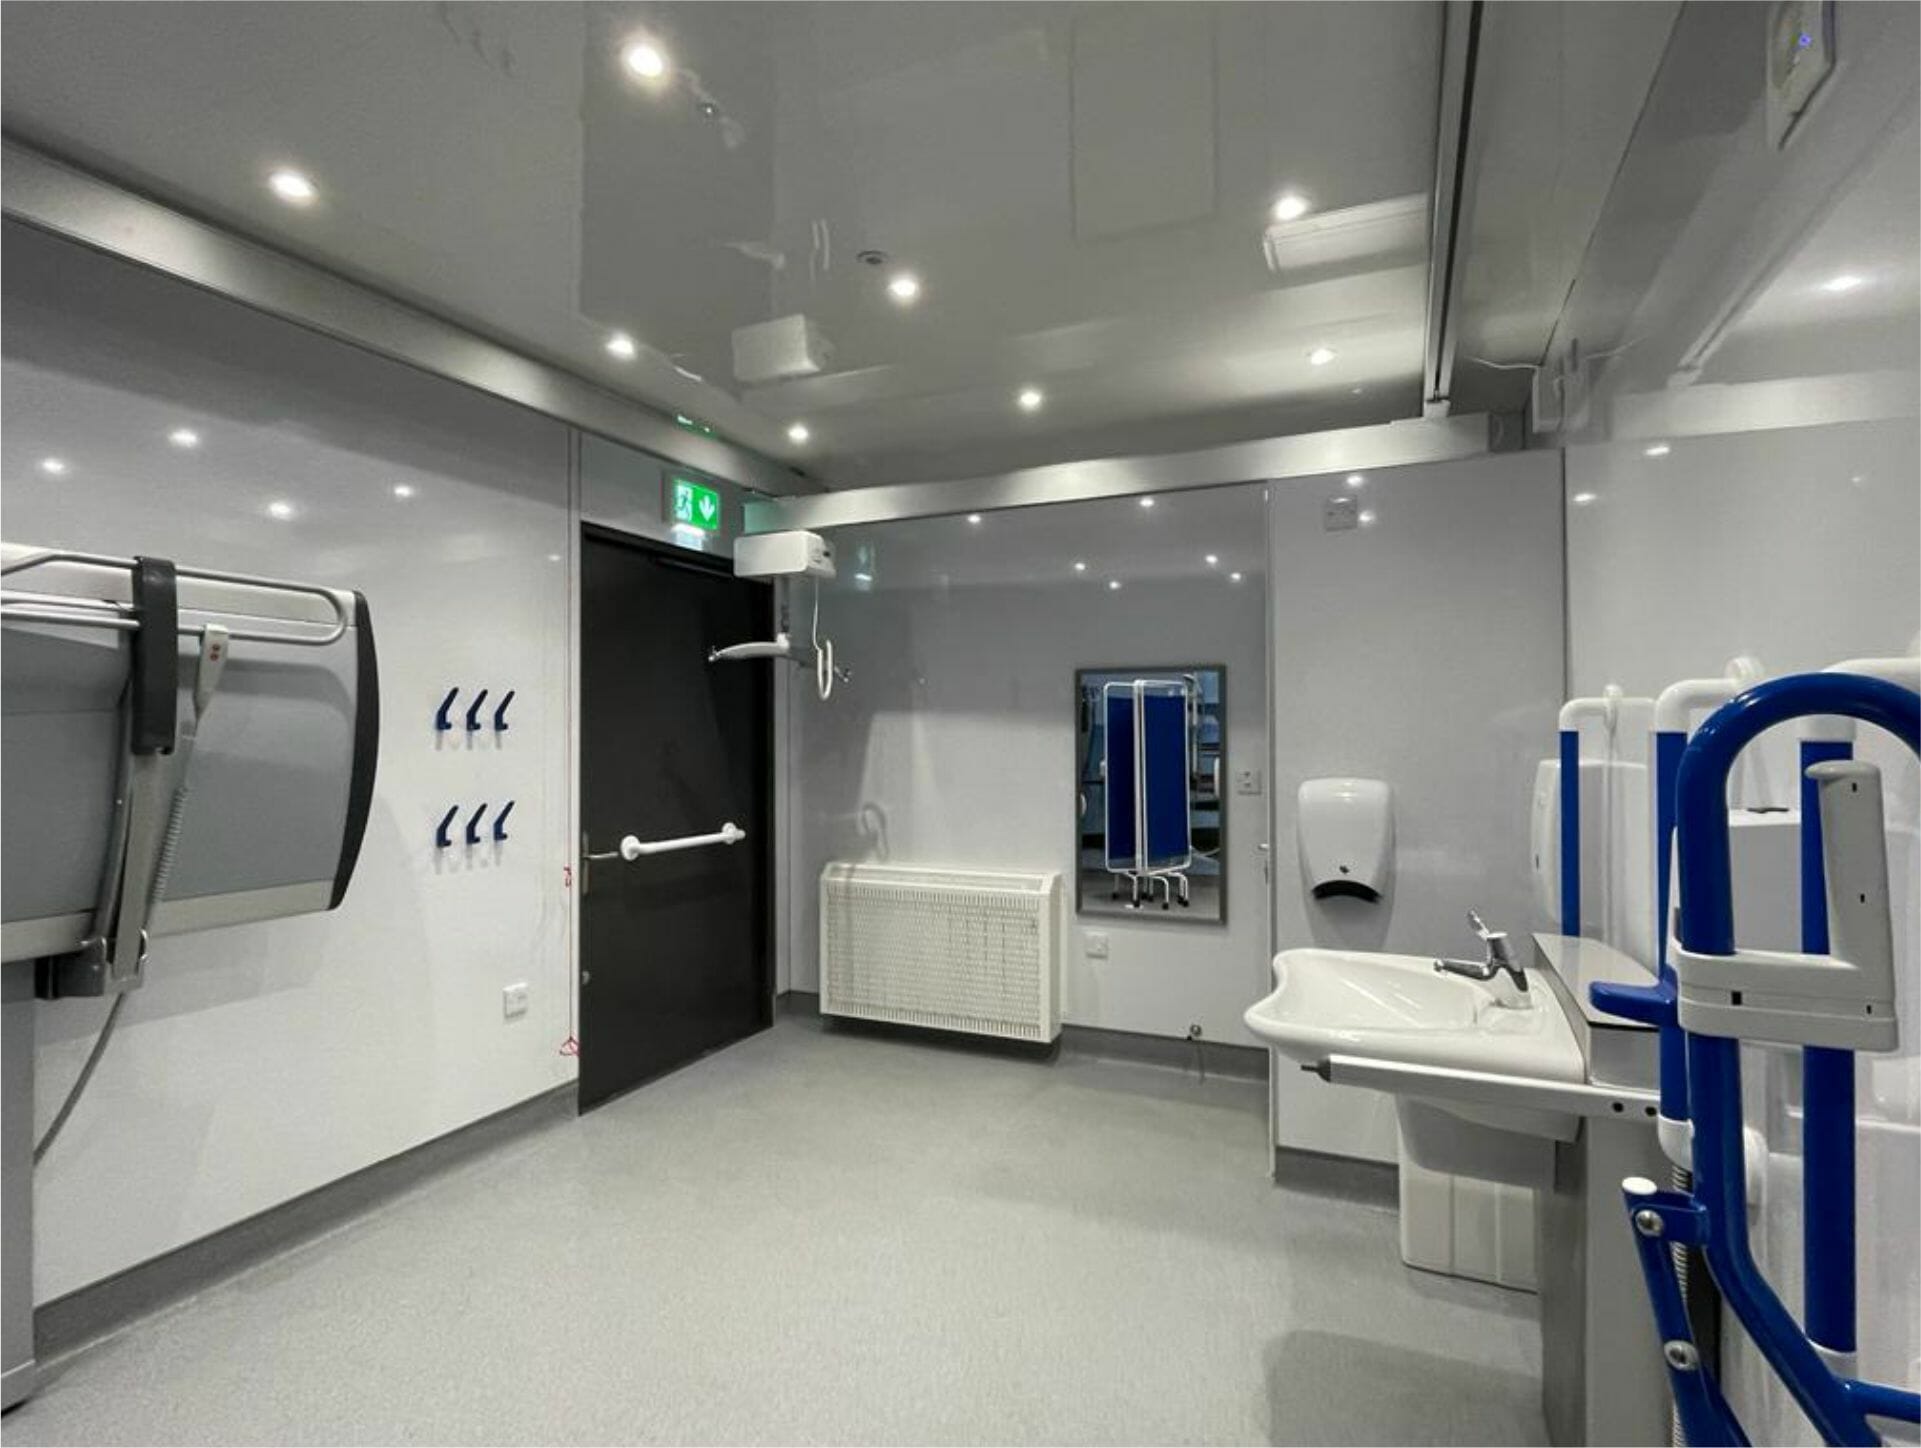 Inside the Gateway Cafe's new modular Changing Places toilet